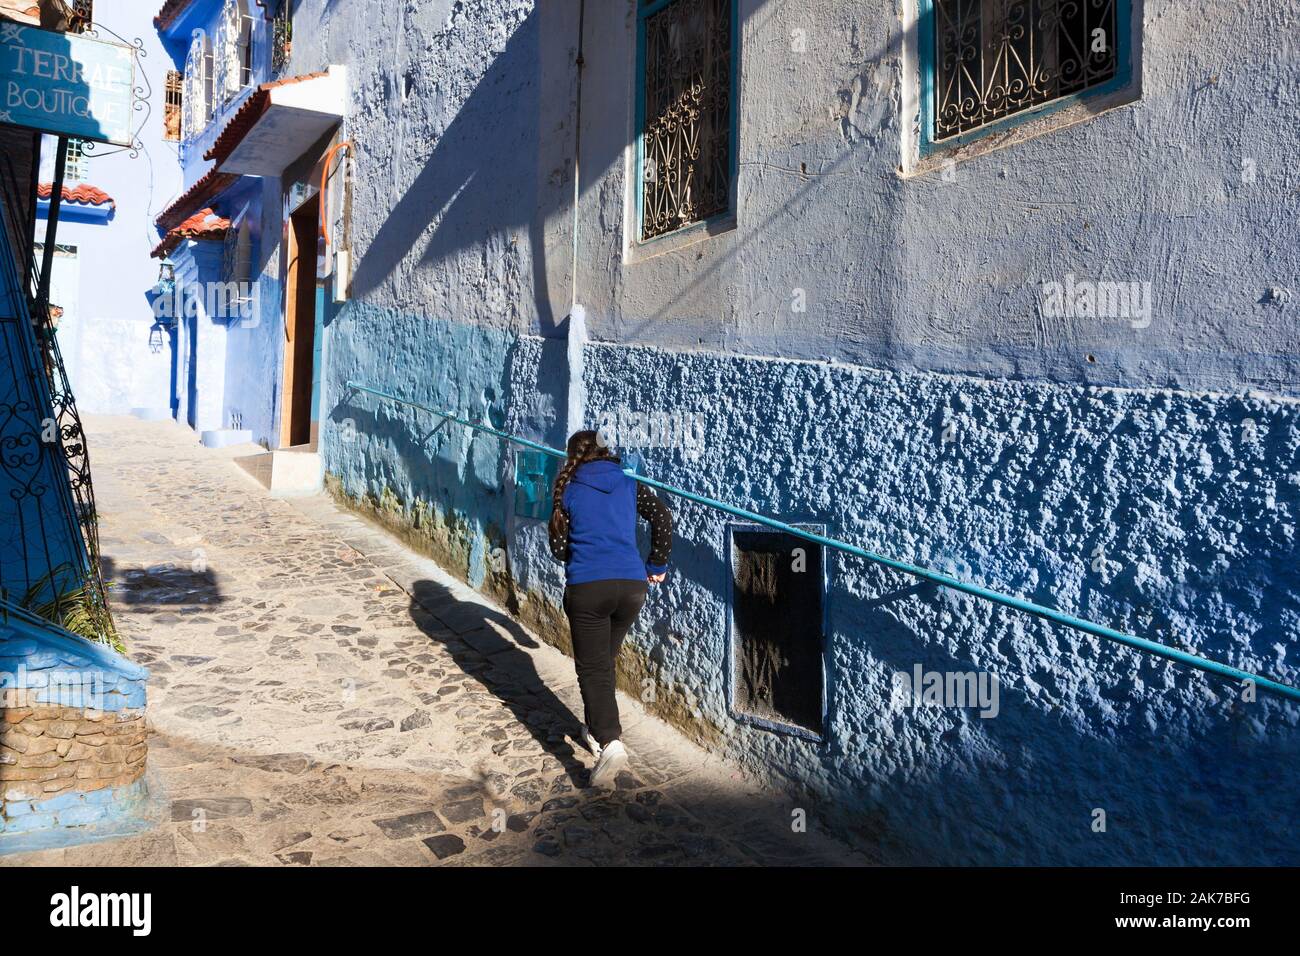 A girl with braid and her shadow in the sunlit street of medina of Chefchaouen (also known as Chaouen), Morocco Stock Photo